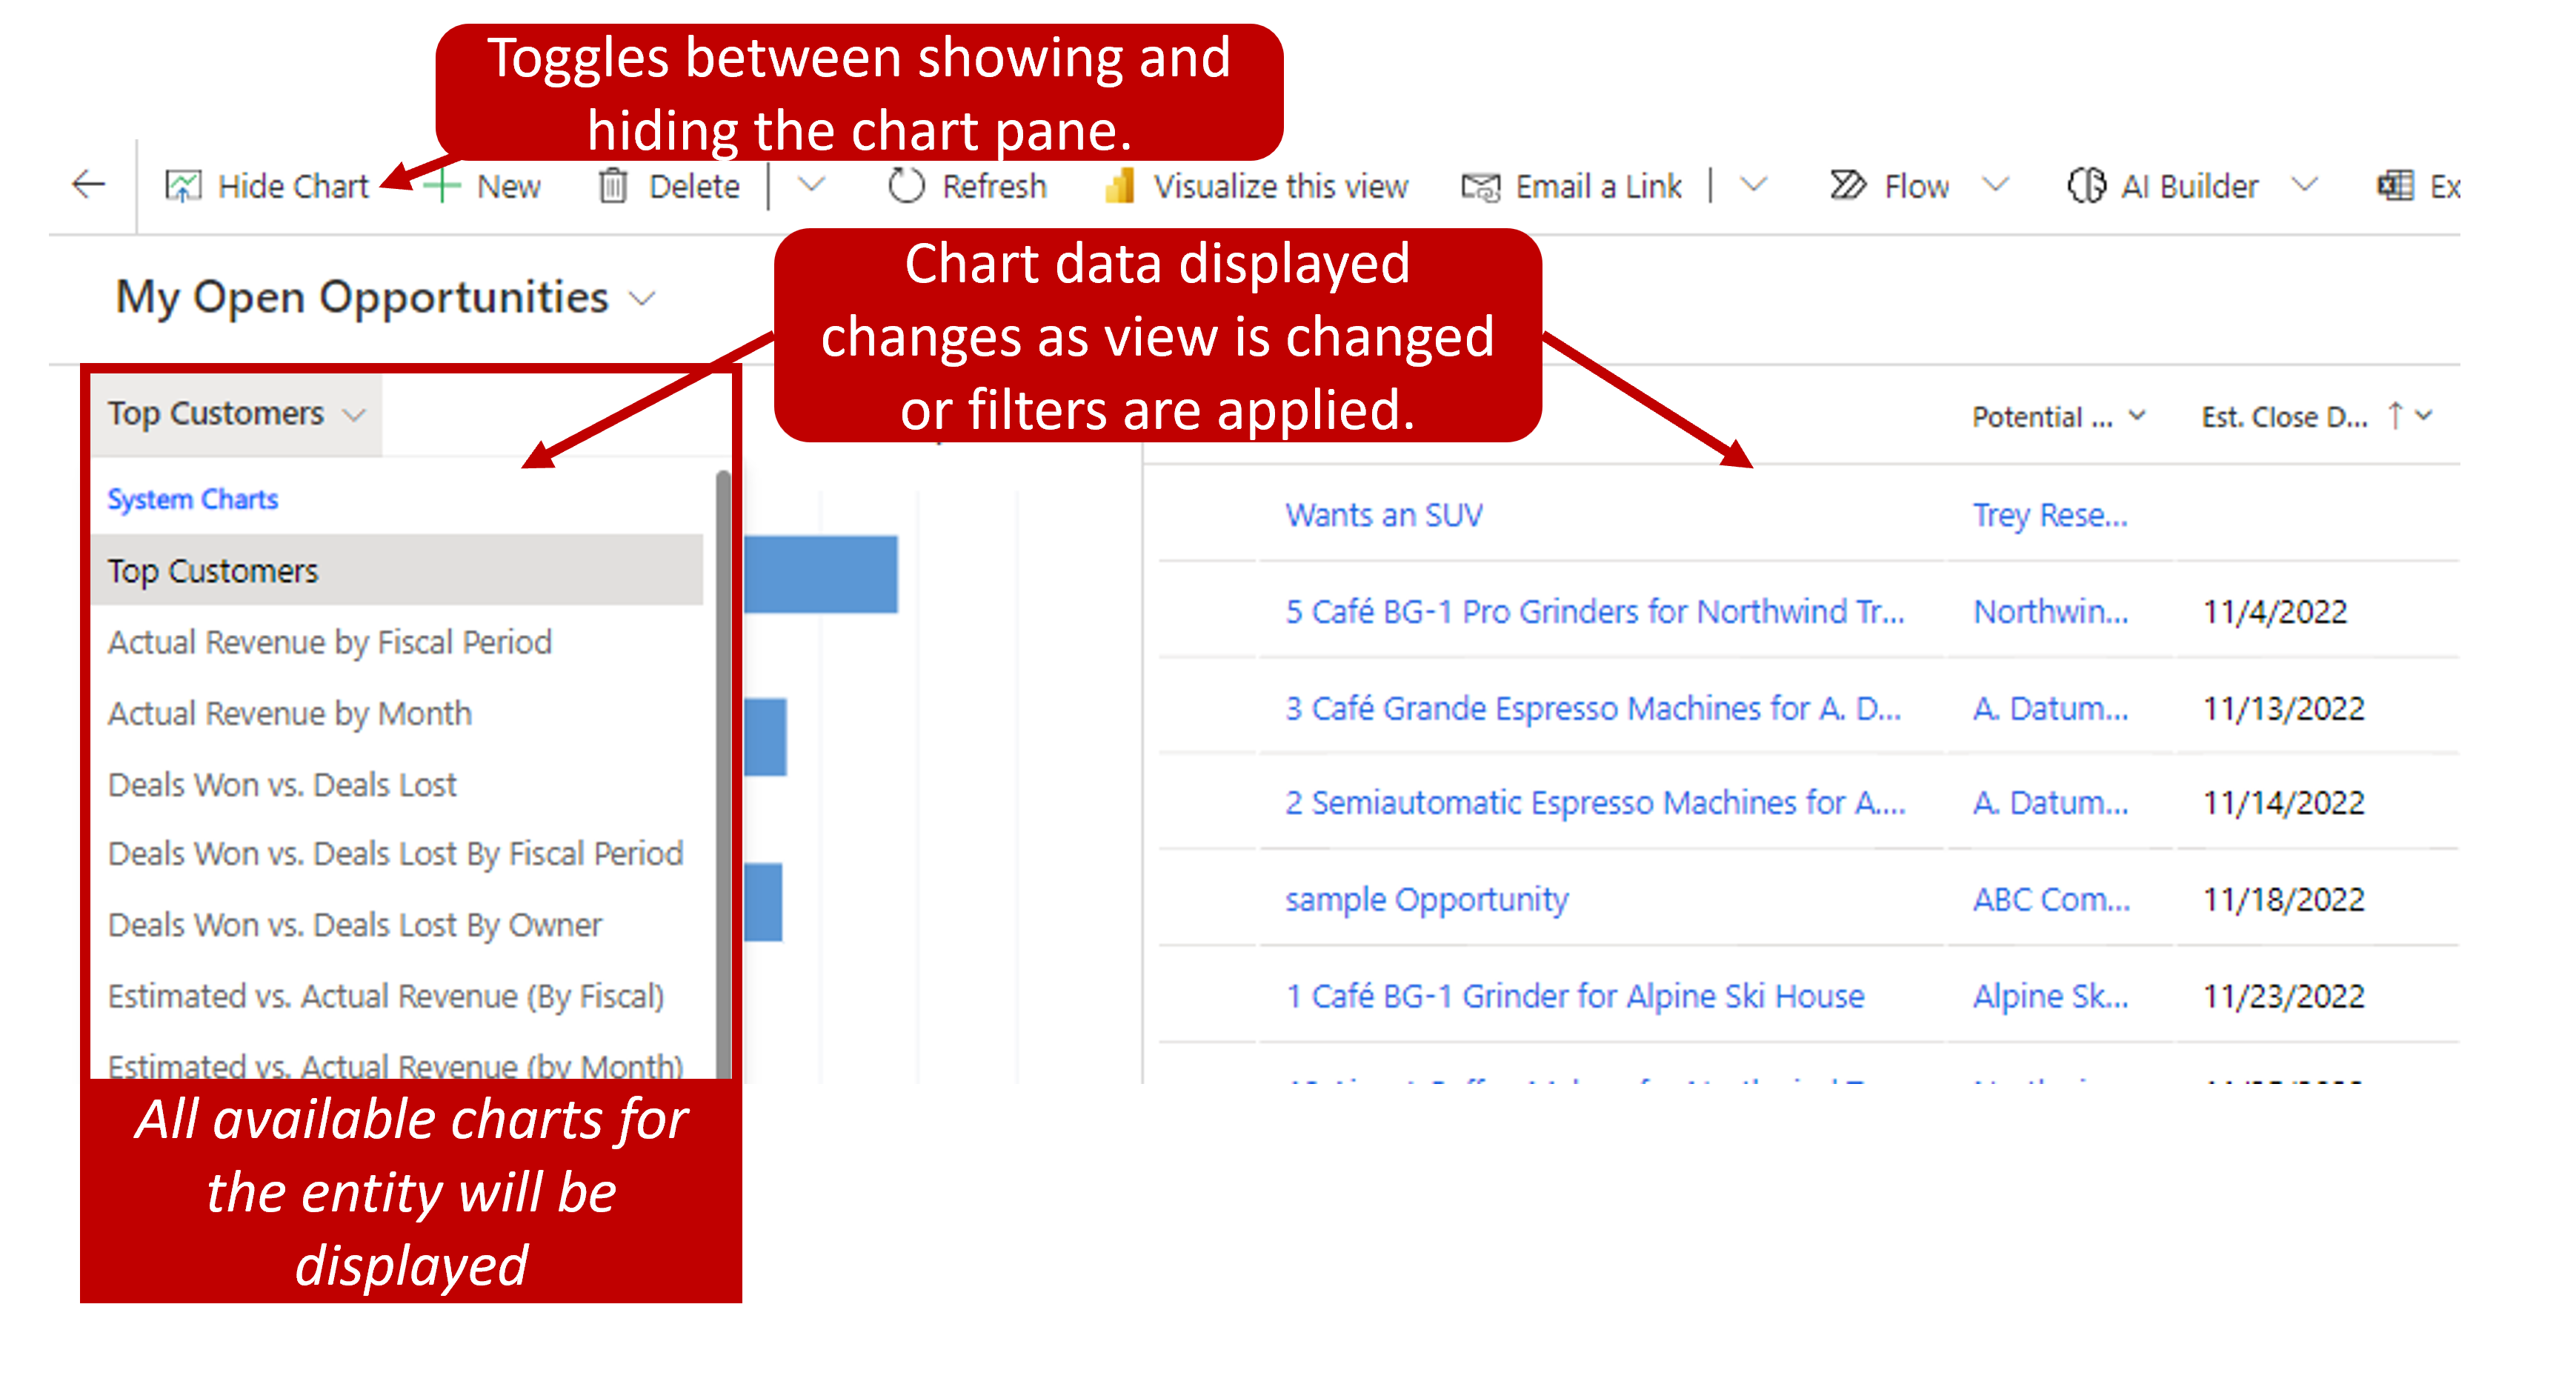 Top Customers chart for the My Open Opportunities view. All available charts for the table display in a list. Chart data displayed changes as view is changed or filters are applied. Hide chart button toggles between showing and hiding the chart pane.